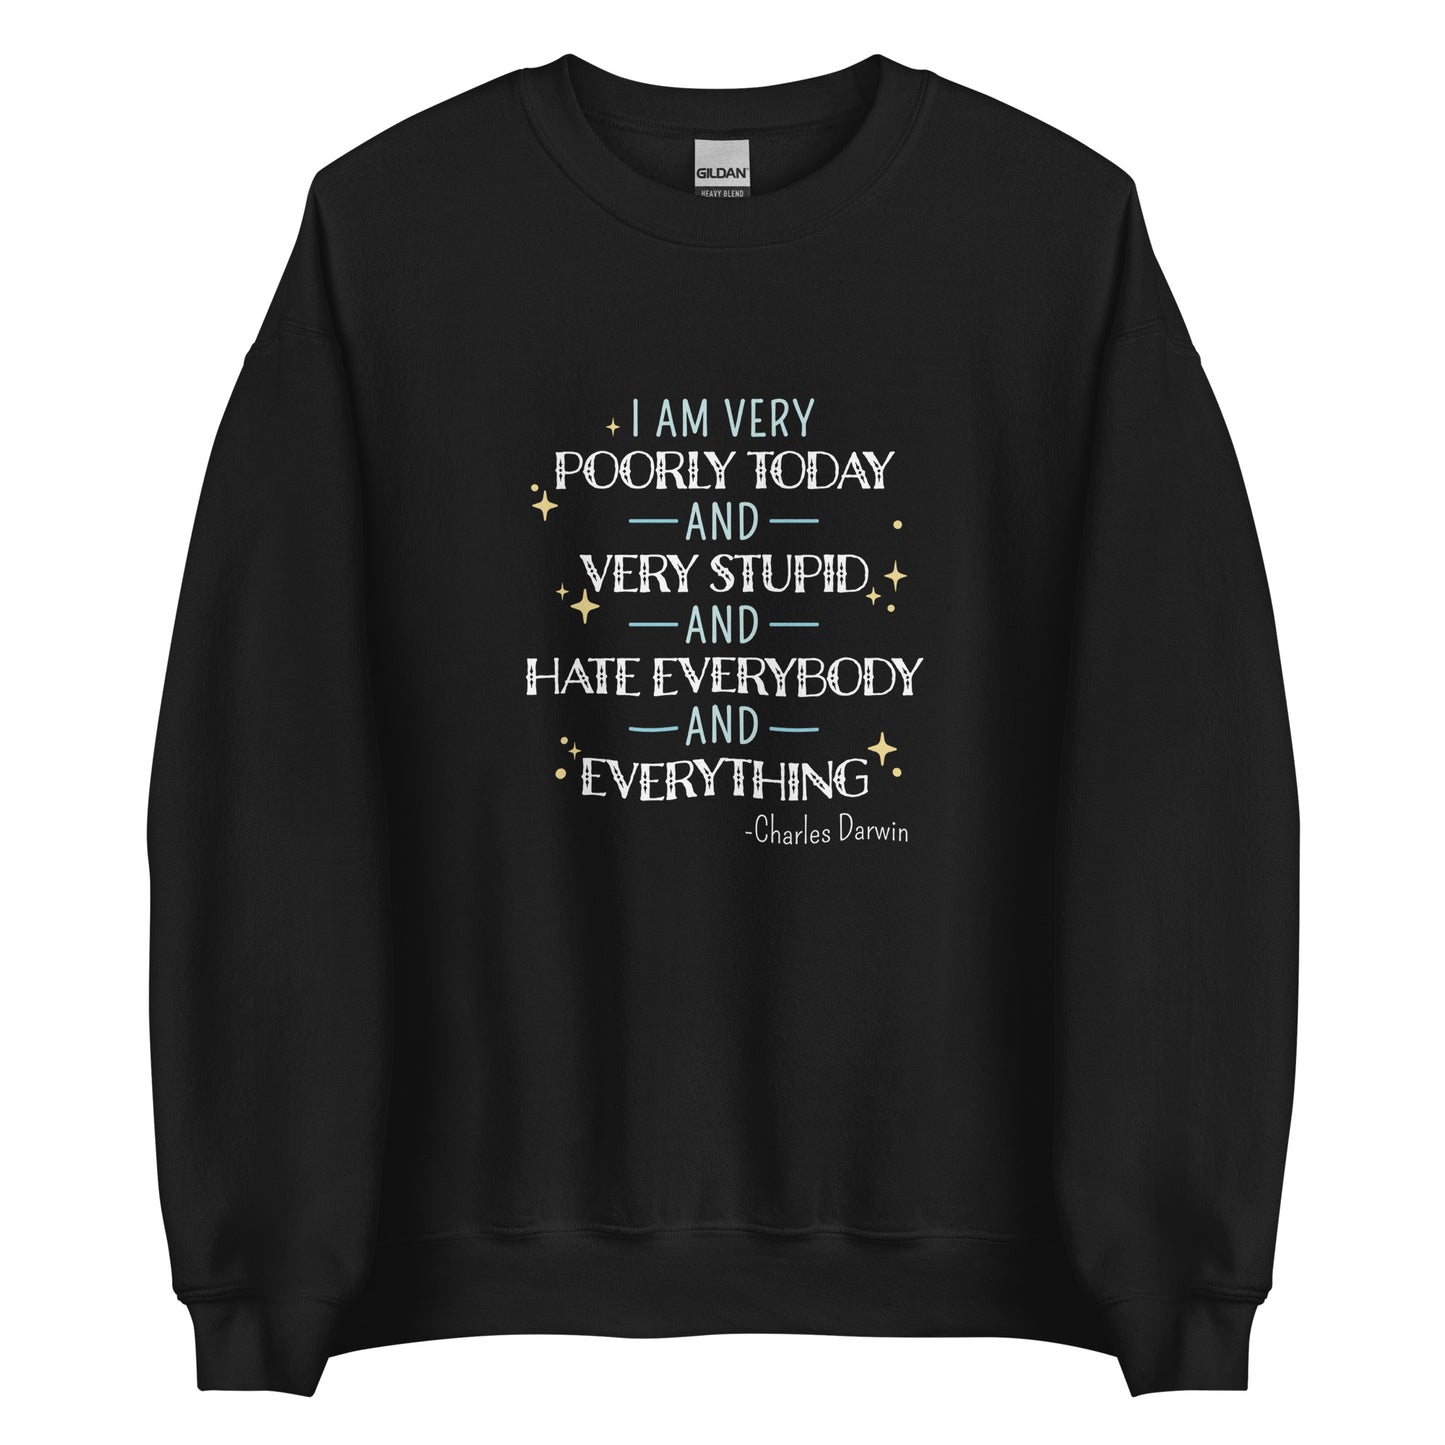 A black crewneck sweatshirt featuring a stylized quote from Charles Darwin in white and blue text. The quote reads "I am very poorly today and very stupid and hate everybody and everything."